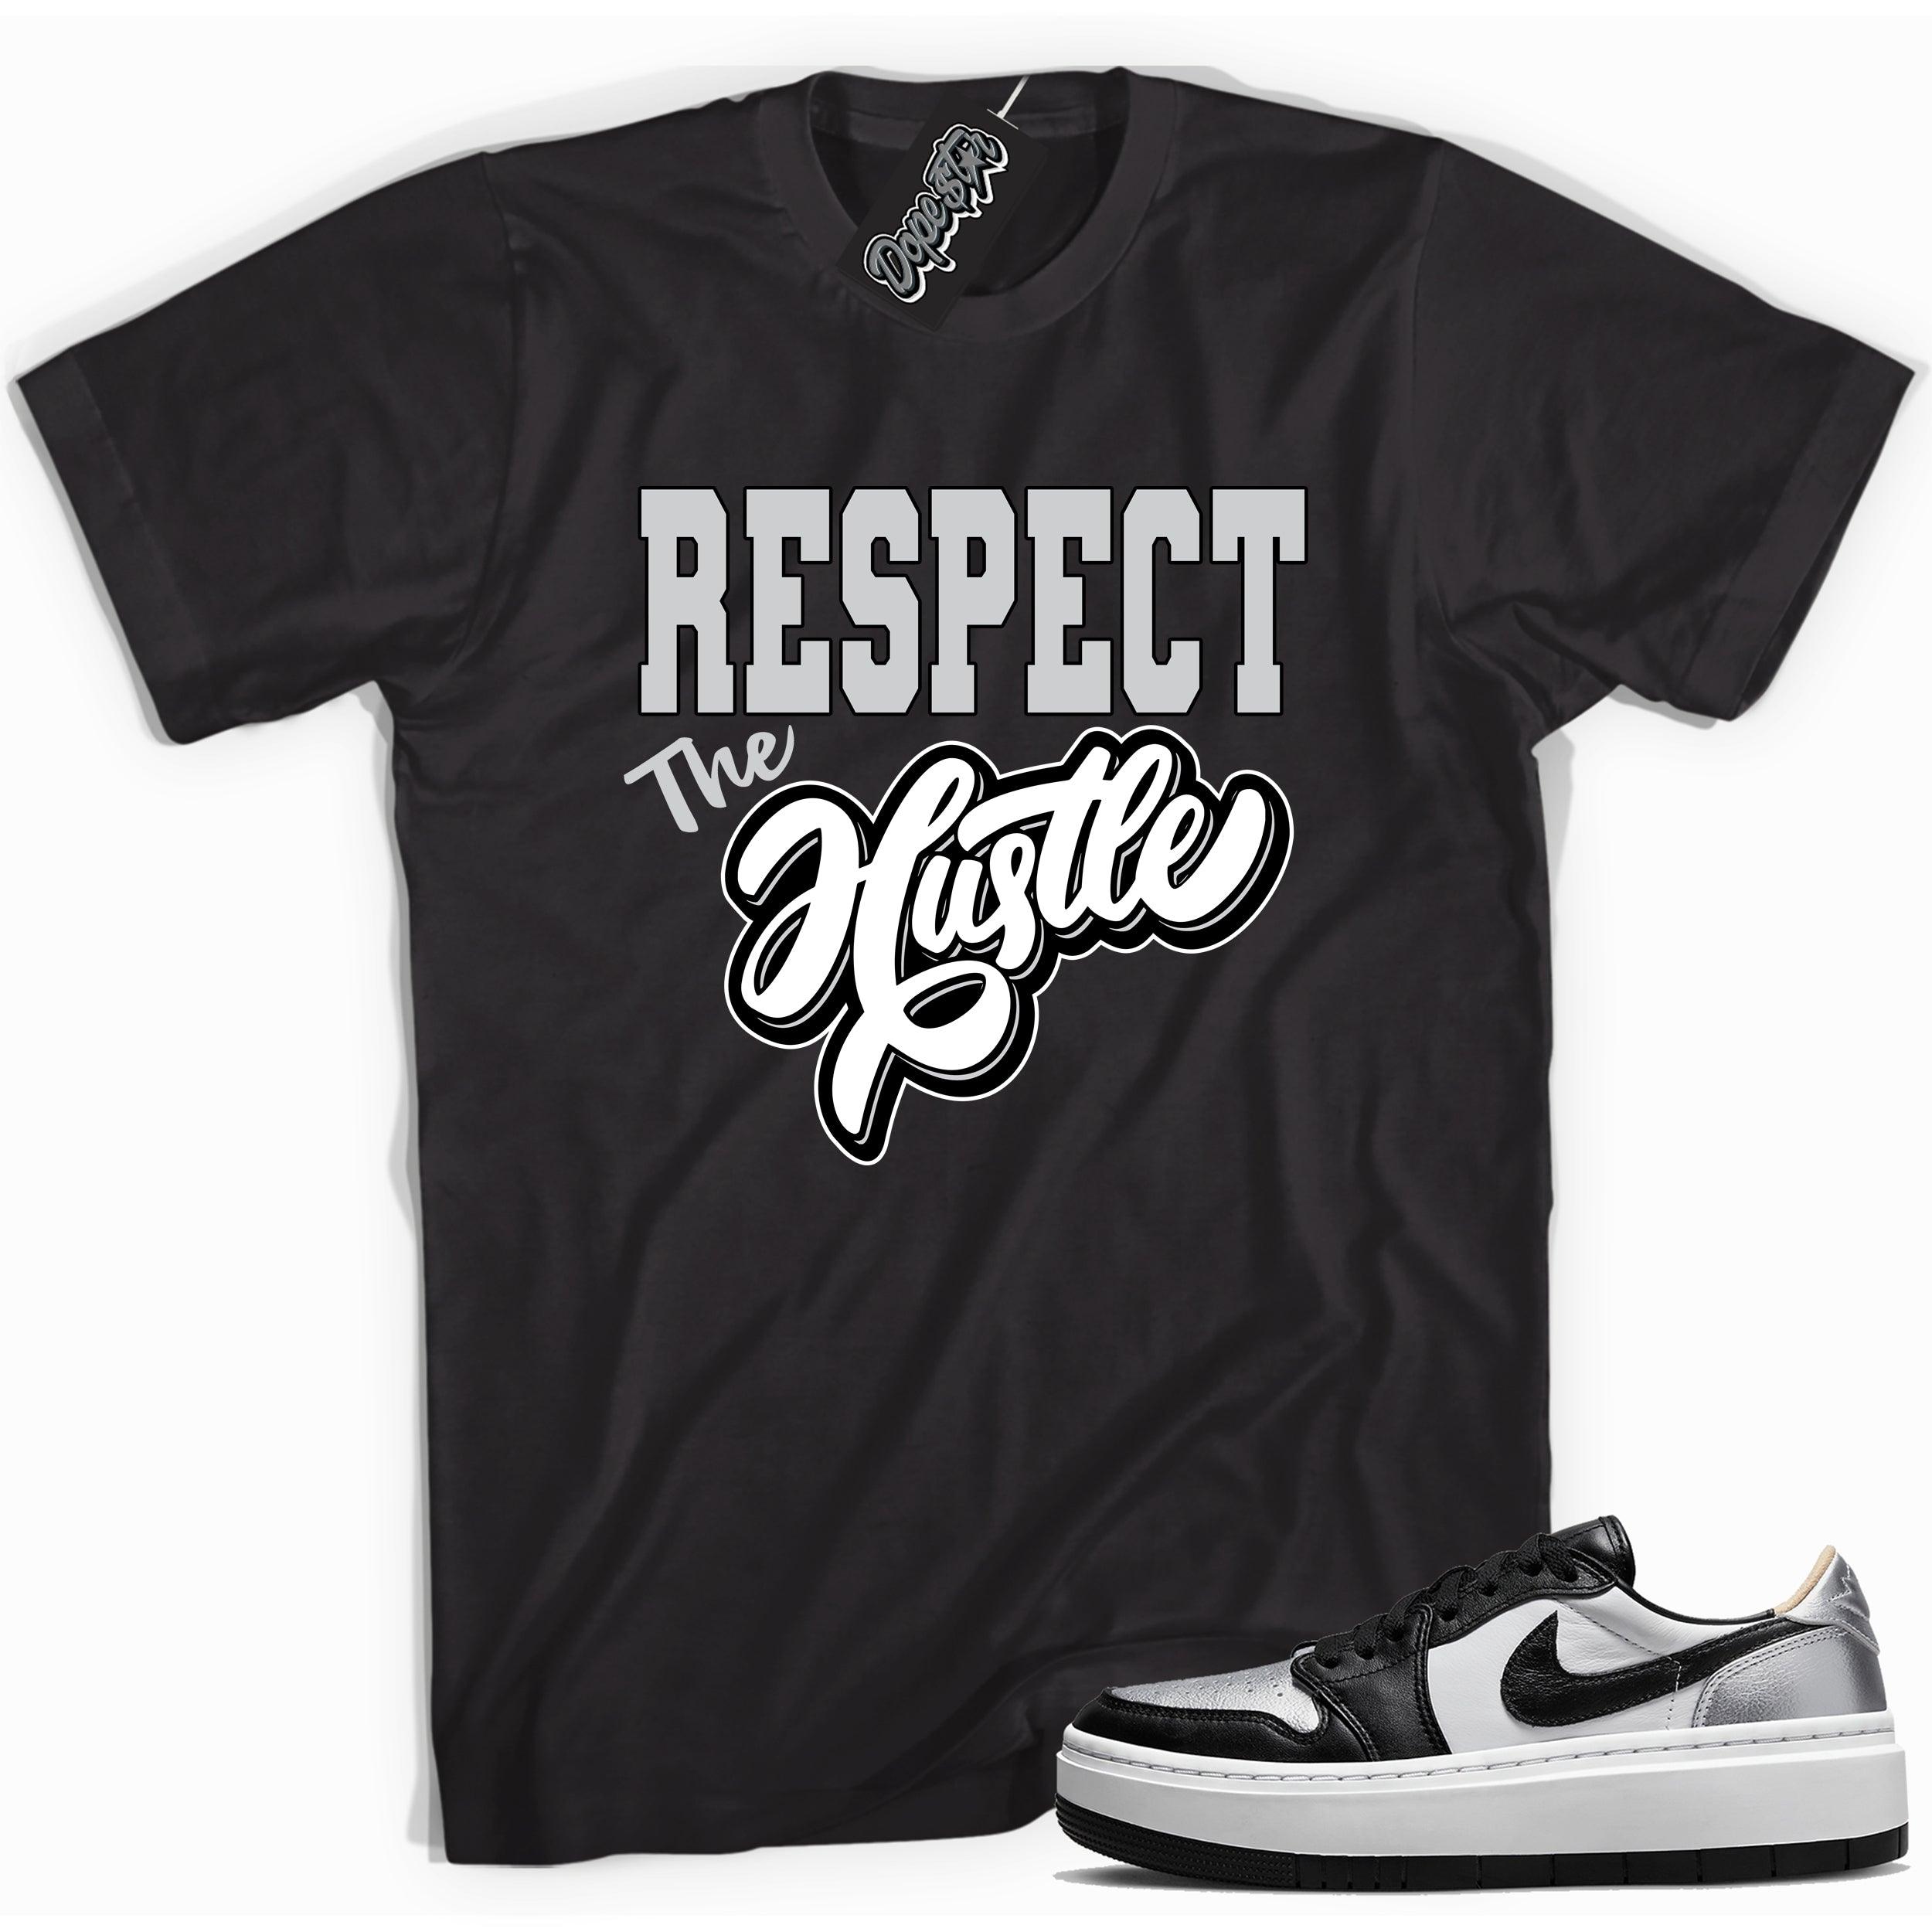 Cool black graphic tee with 'respect the hustle' print, that perfectly matches Air Jordan 1 Elevate Low SE Silver Toe sneakers.